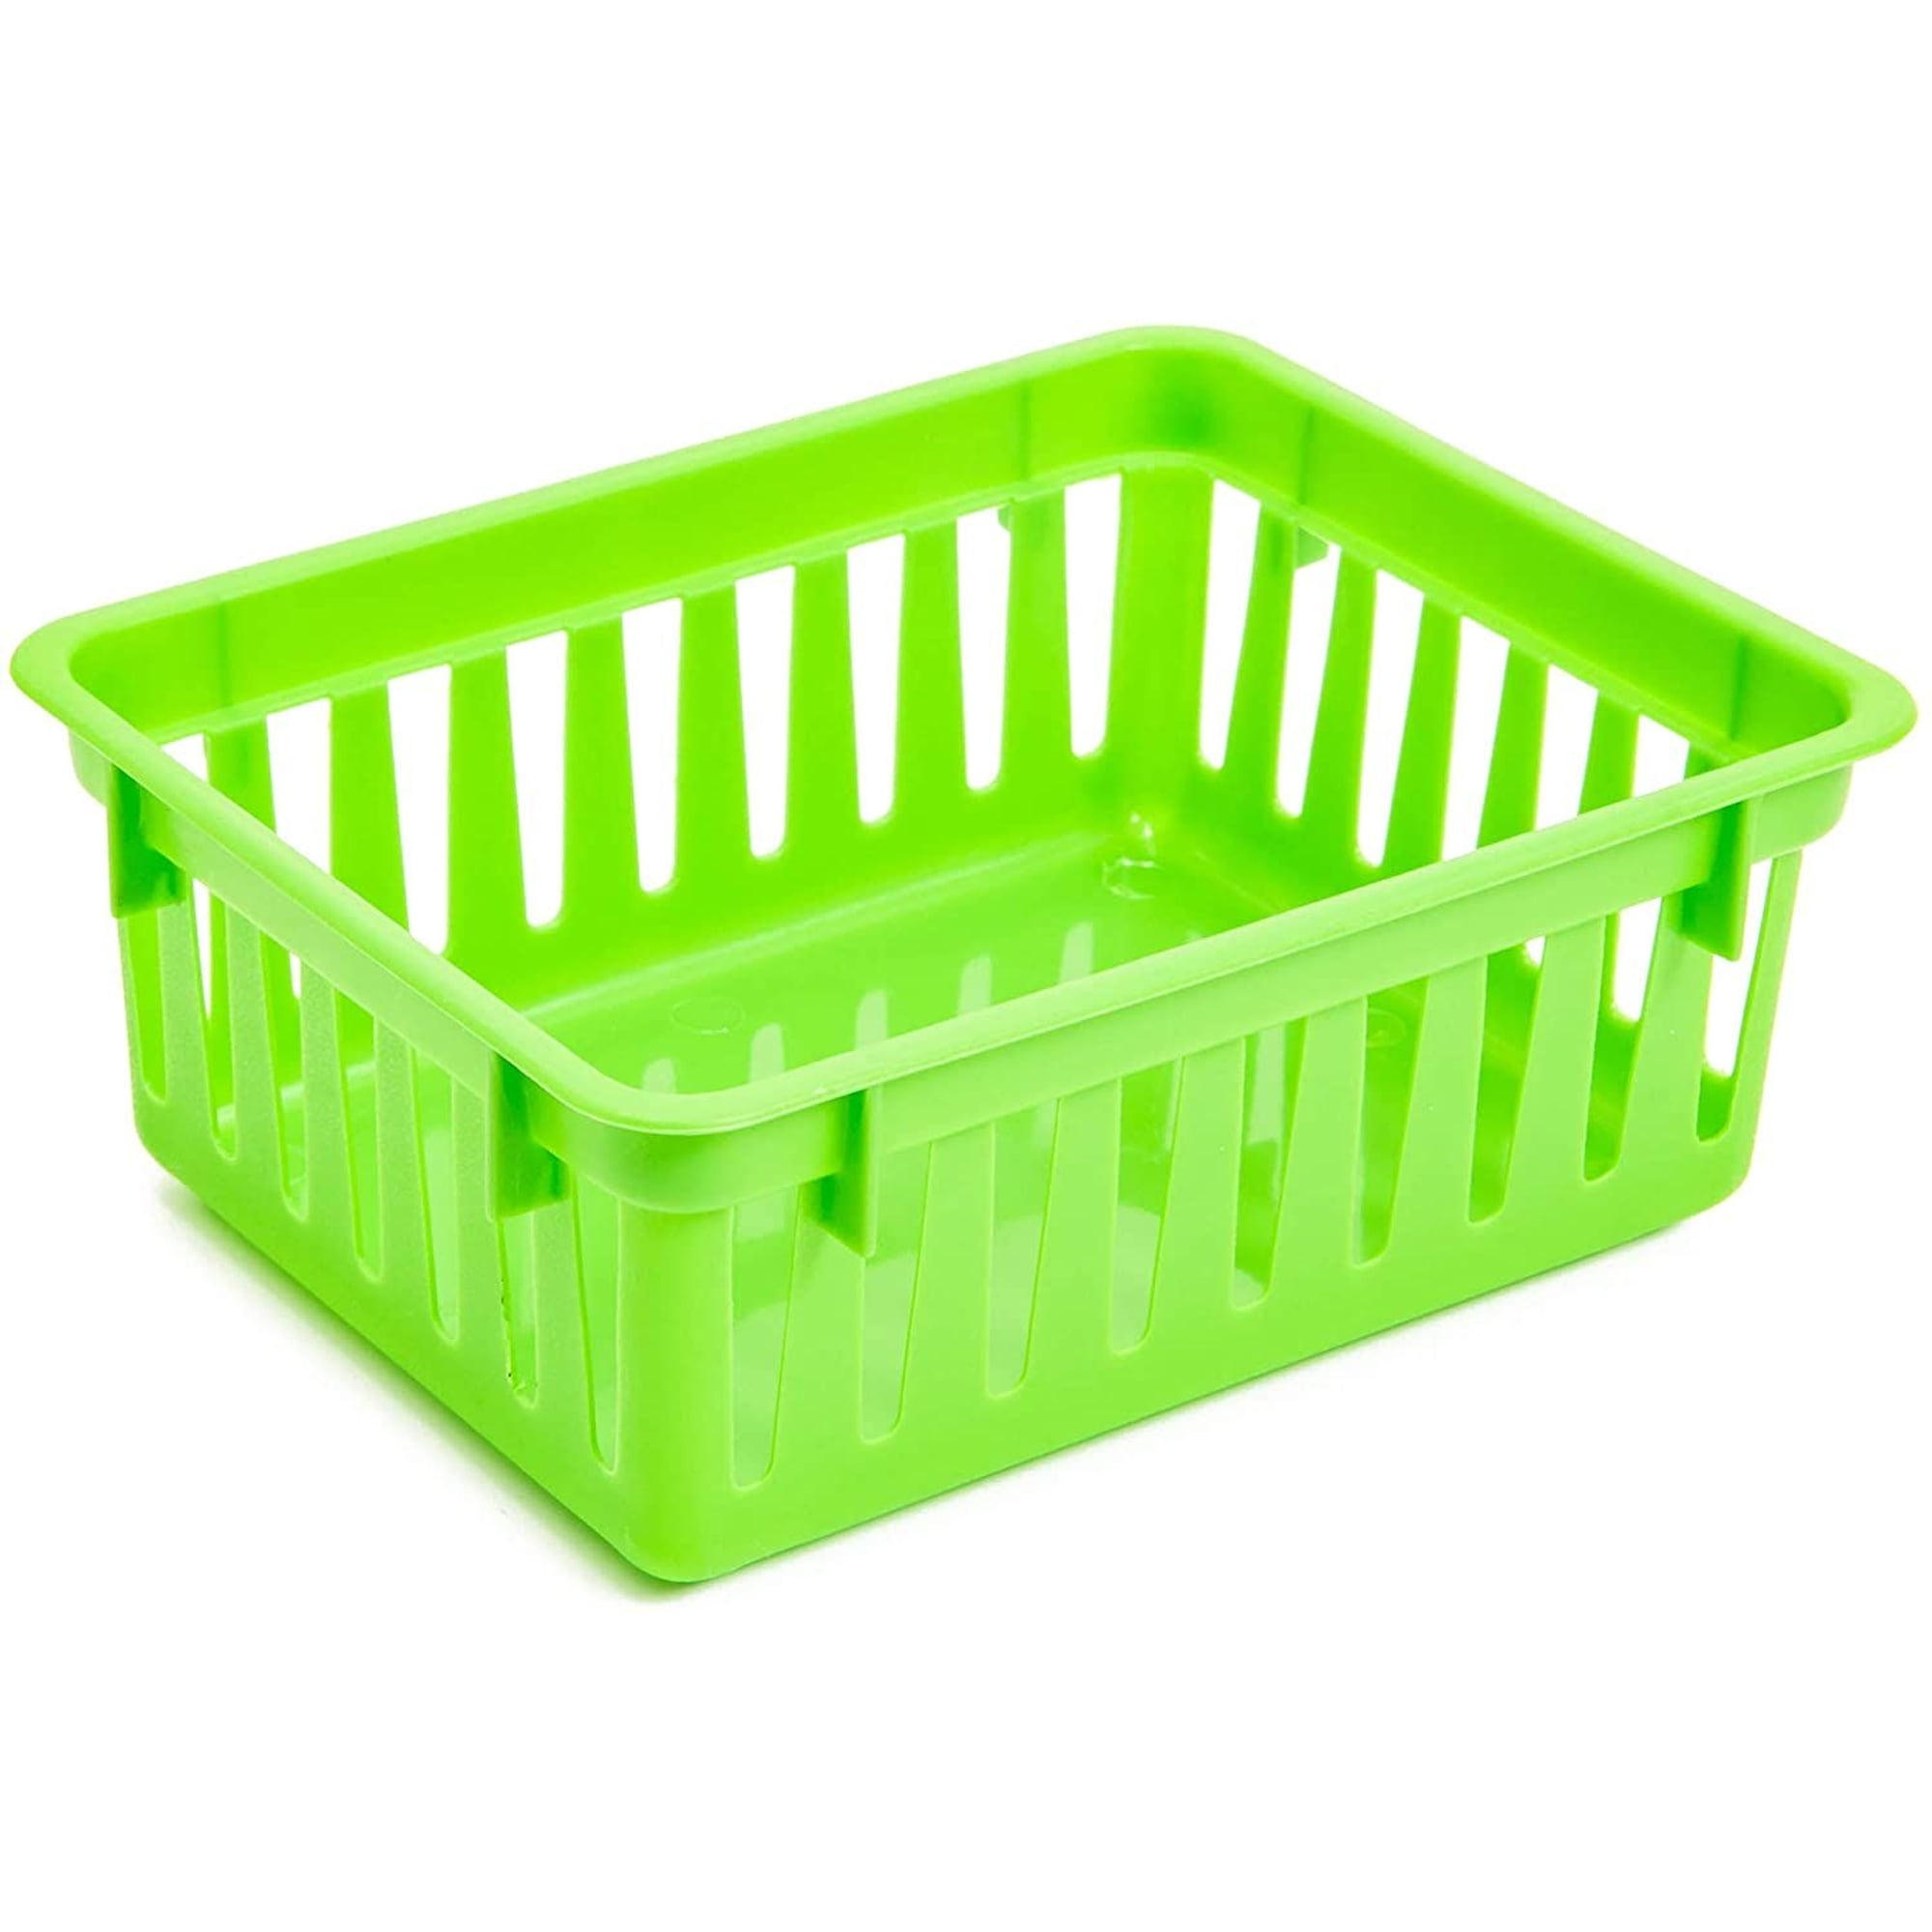 OWill 12-Pack Mixed Plastic Storage Bins and Baskets for Efficient Home  Classroom Organization - Small Containers in Multiple Colors for Kitchen